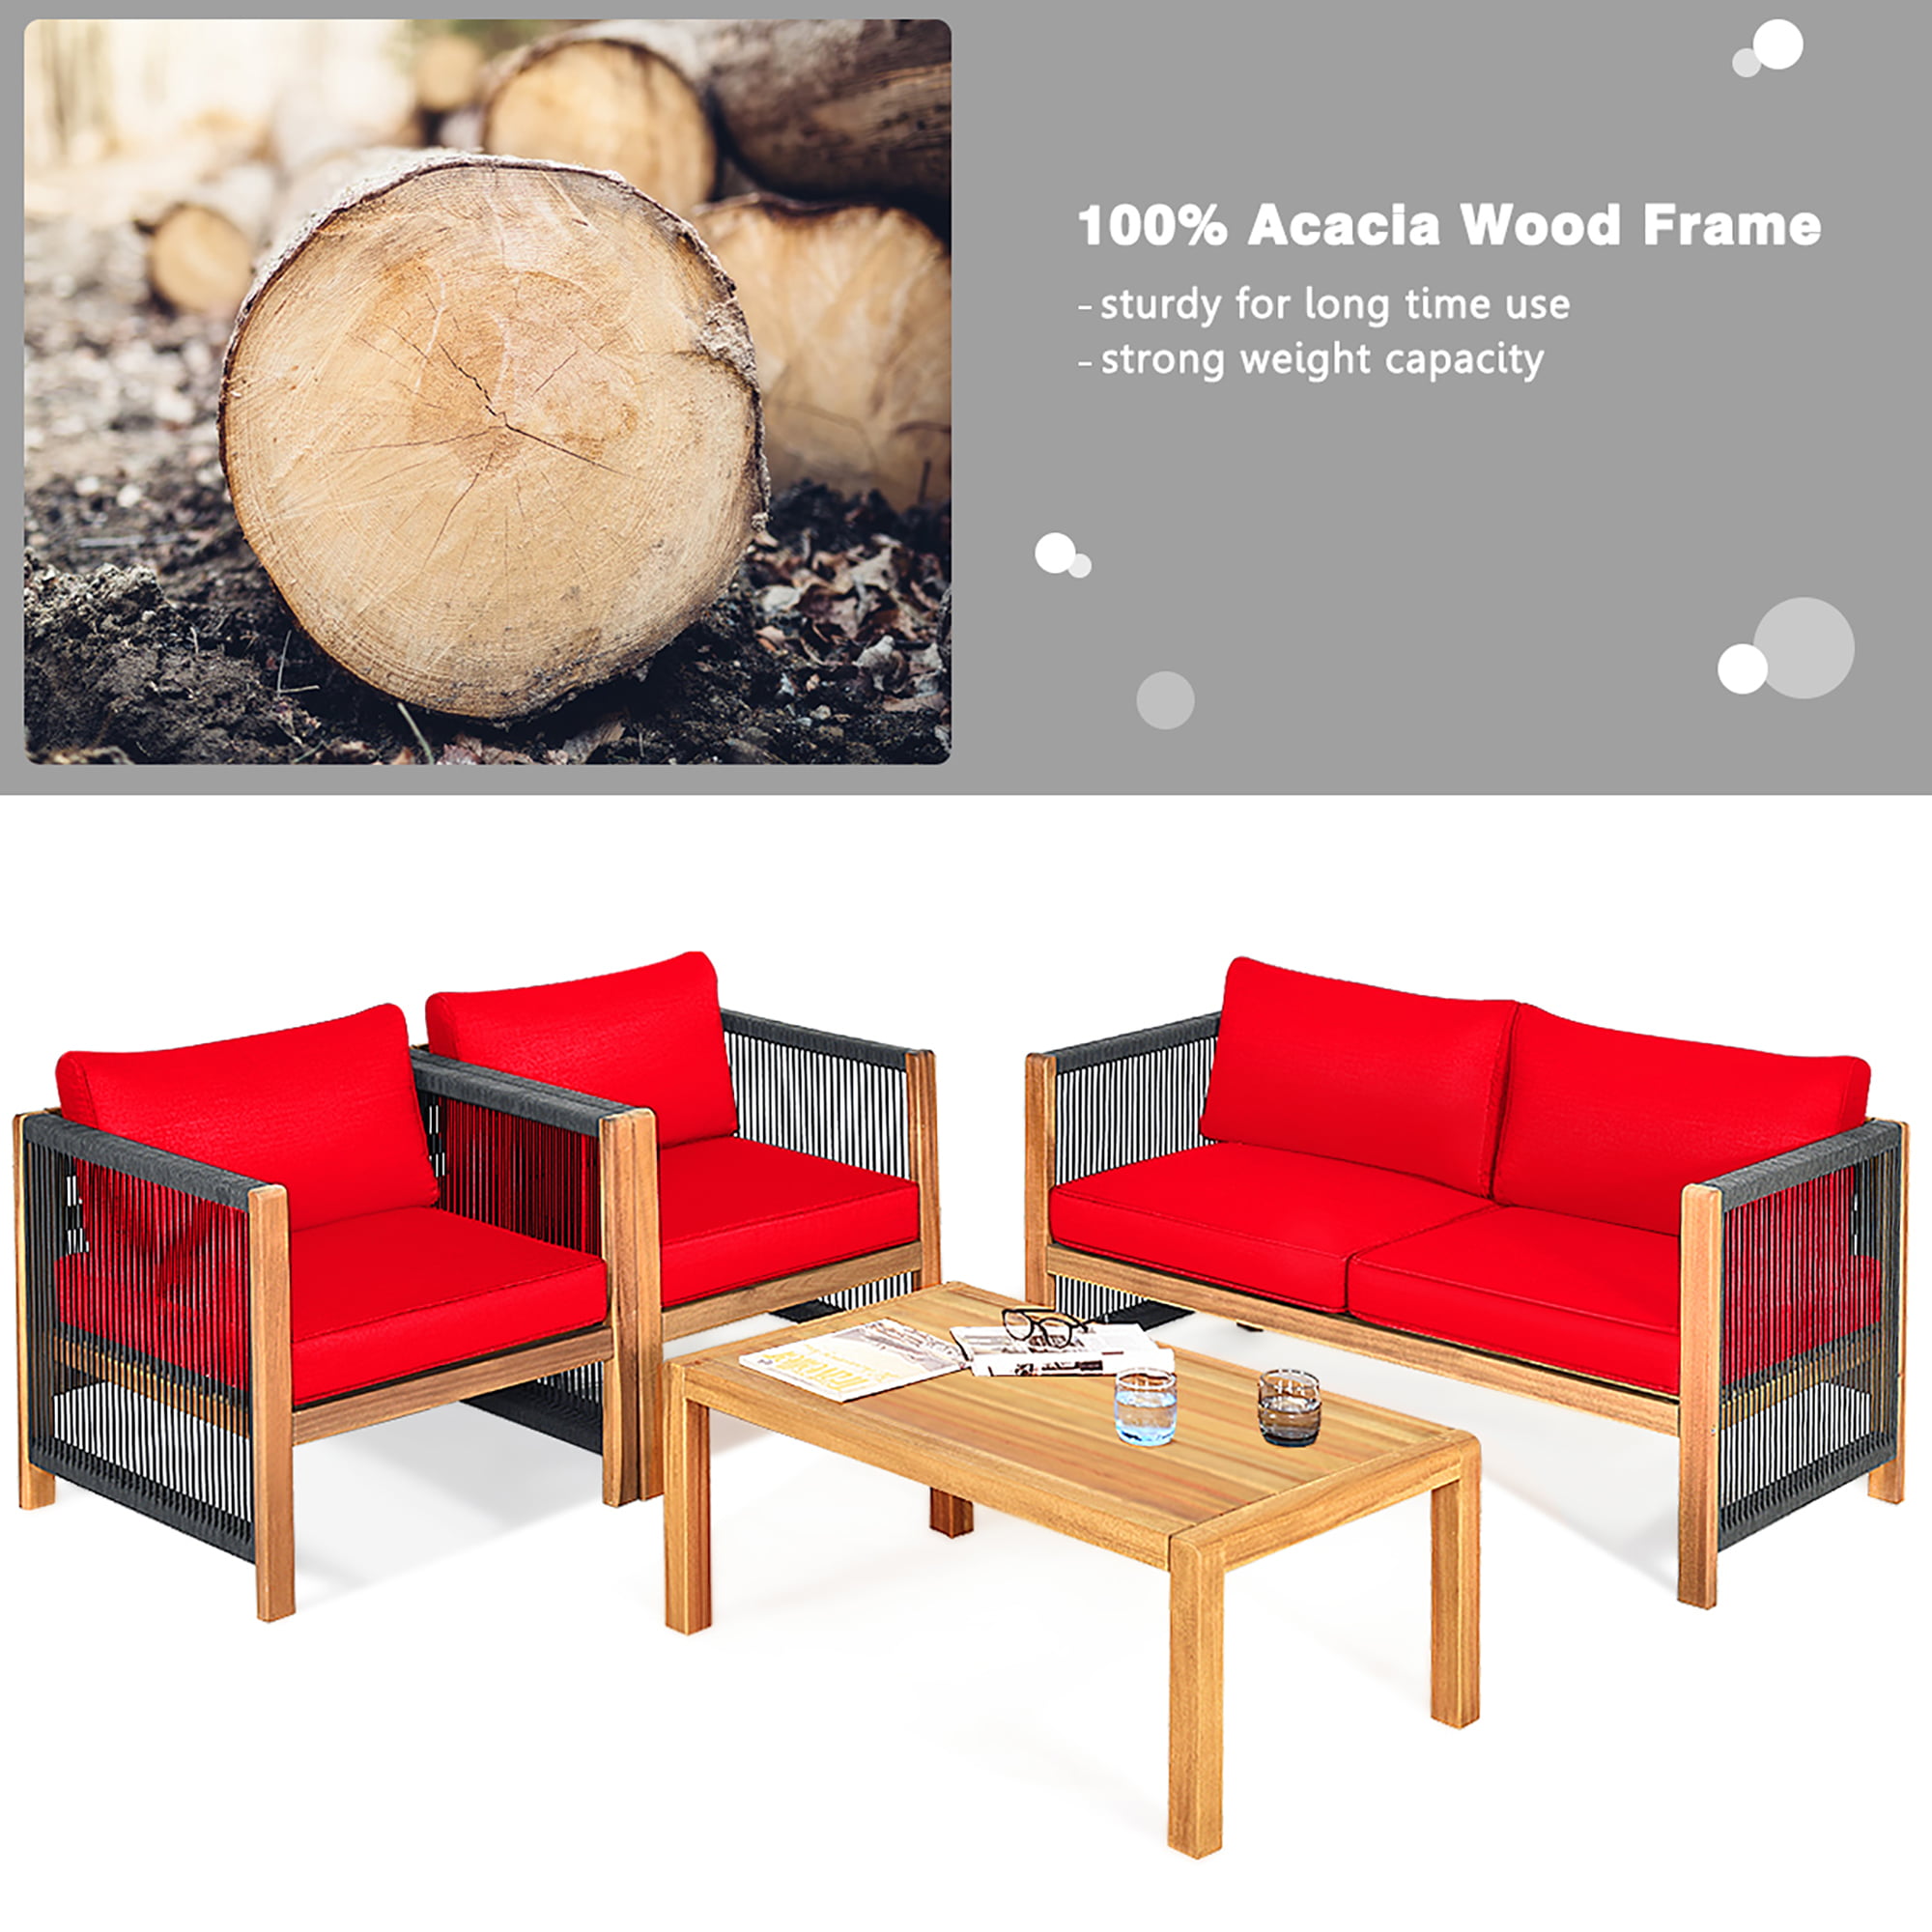 Costway 4 PCS Acacia Wood Patio Conversation Set w/Cushions for Garden Red  